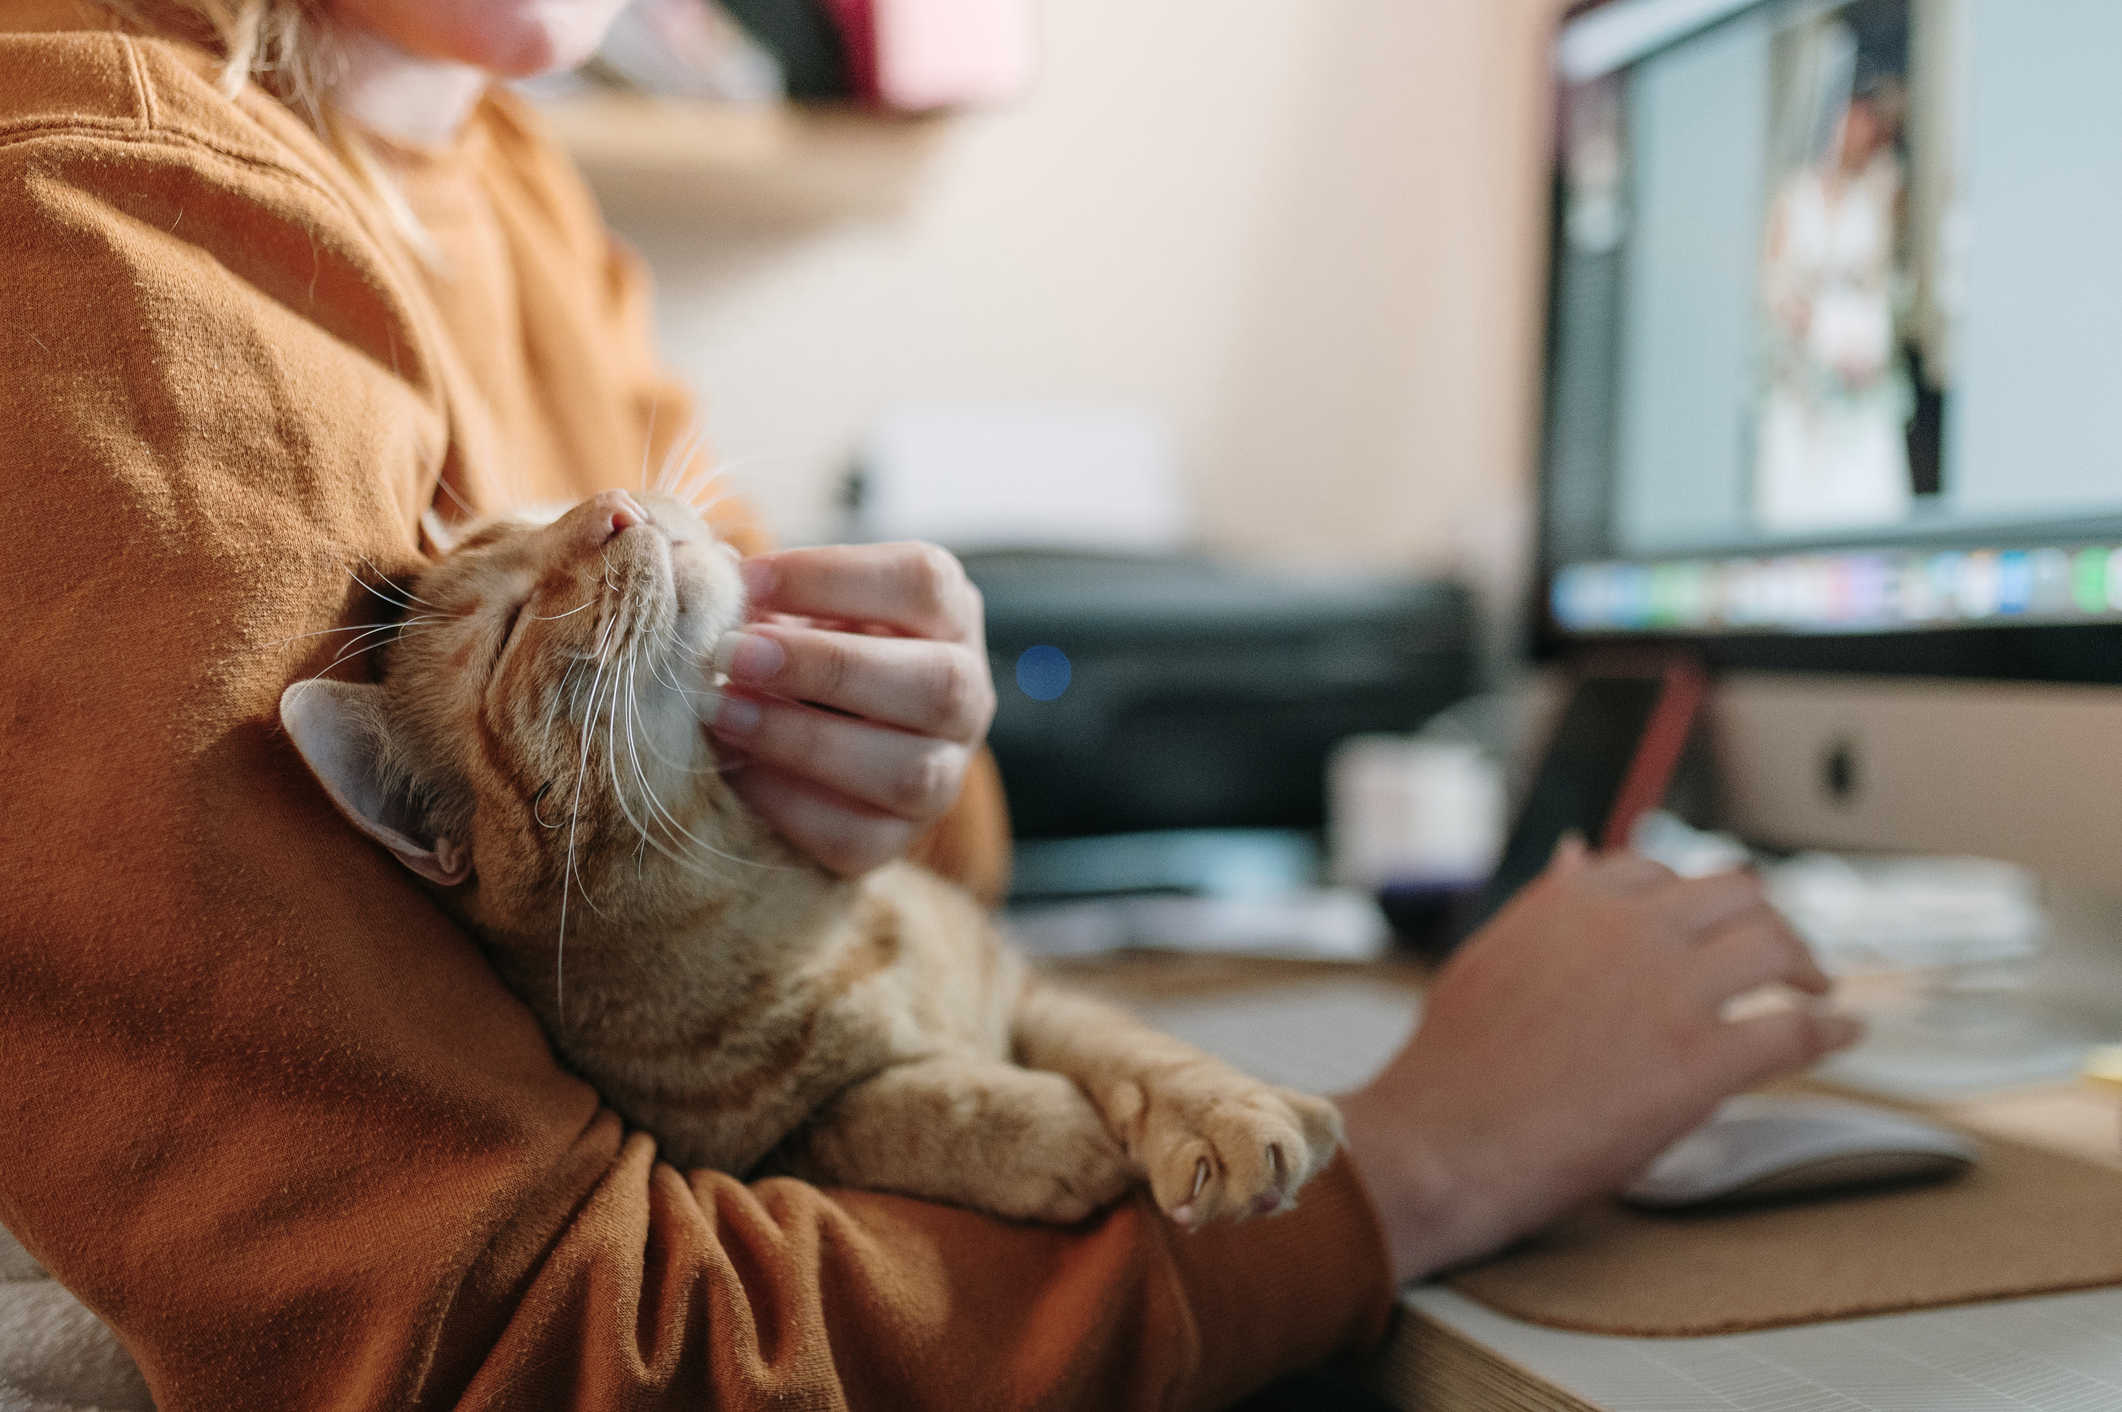 Employee working from home enjoys a more creative employee benefit package than ever before, including things like pet insurance